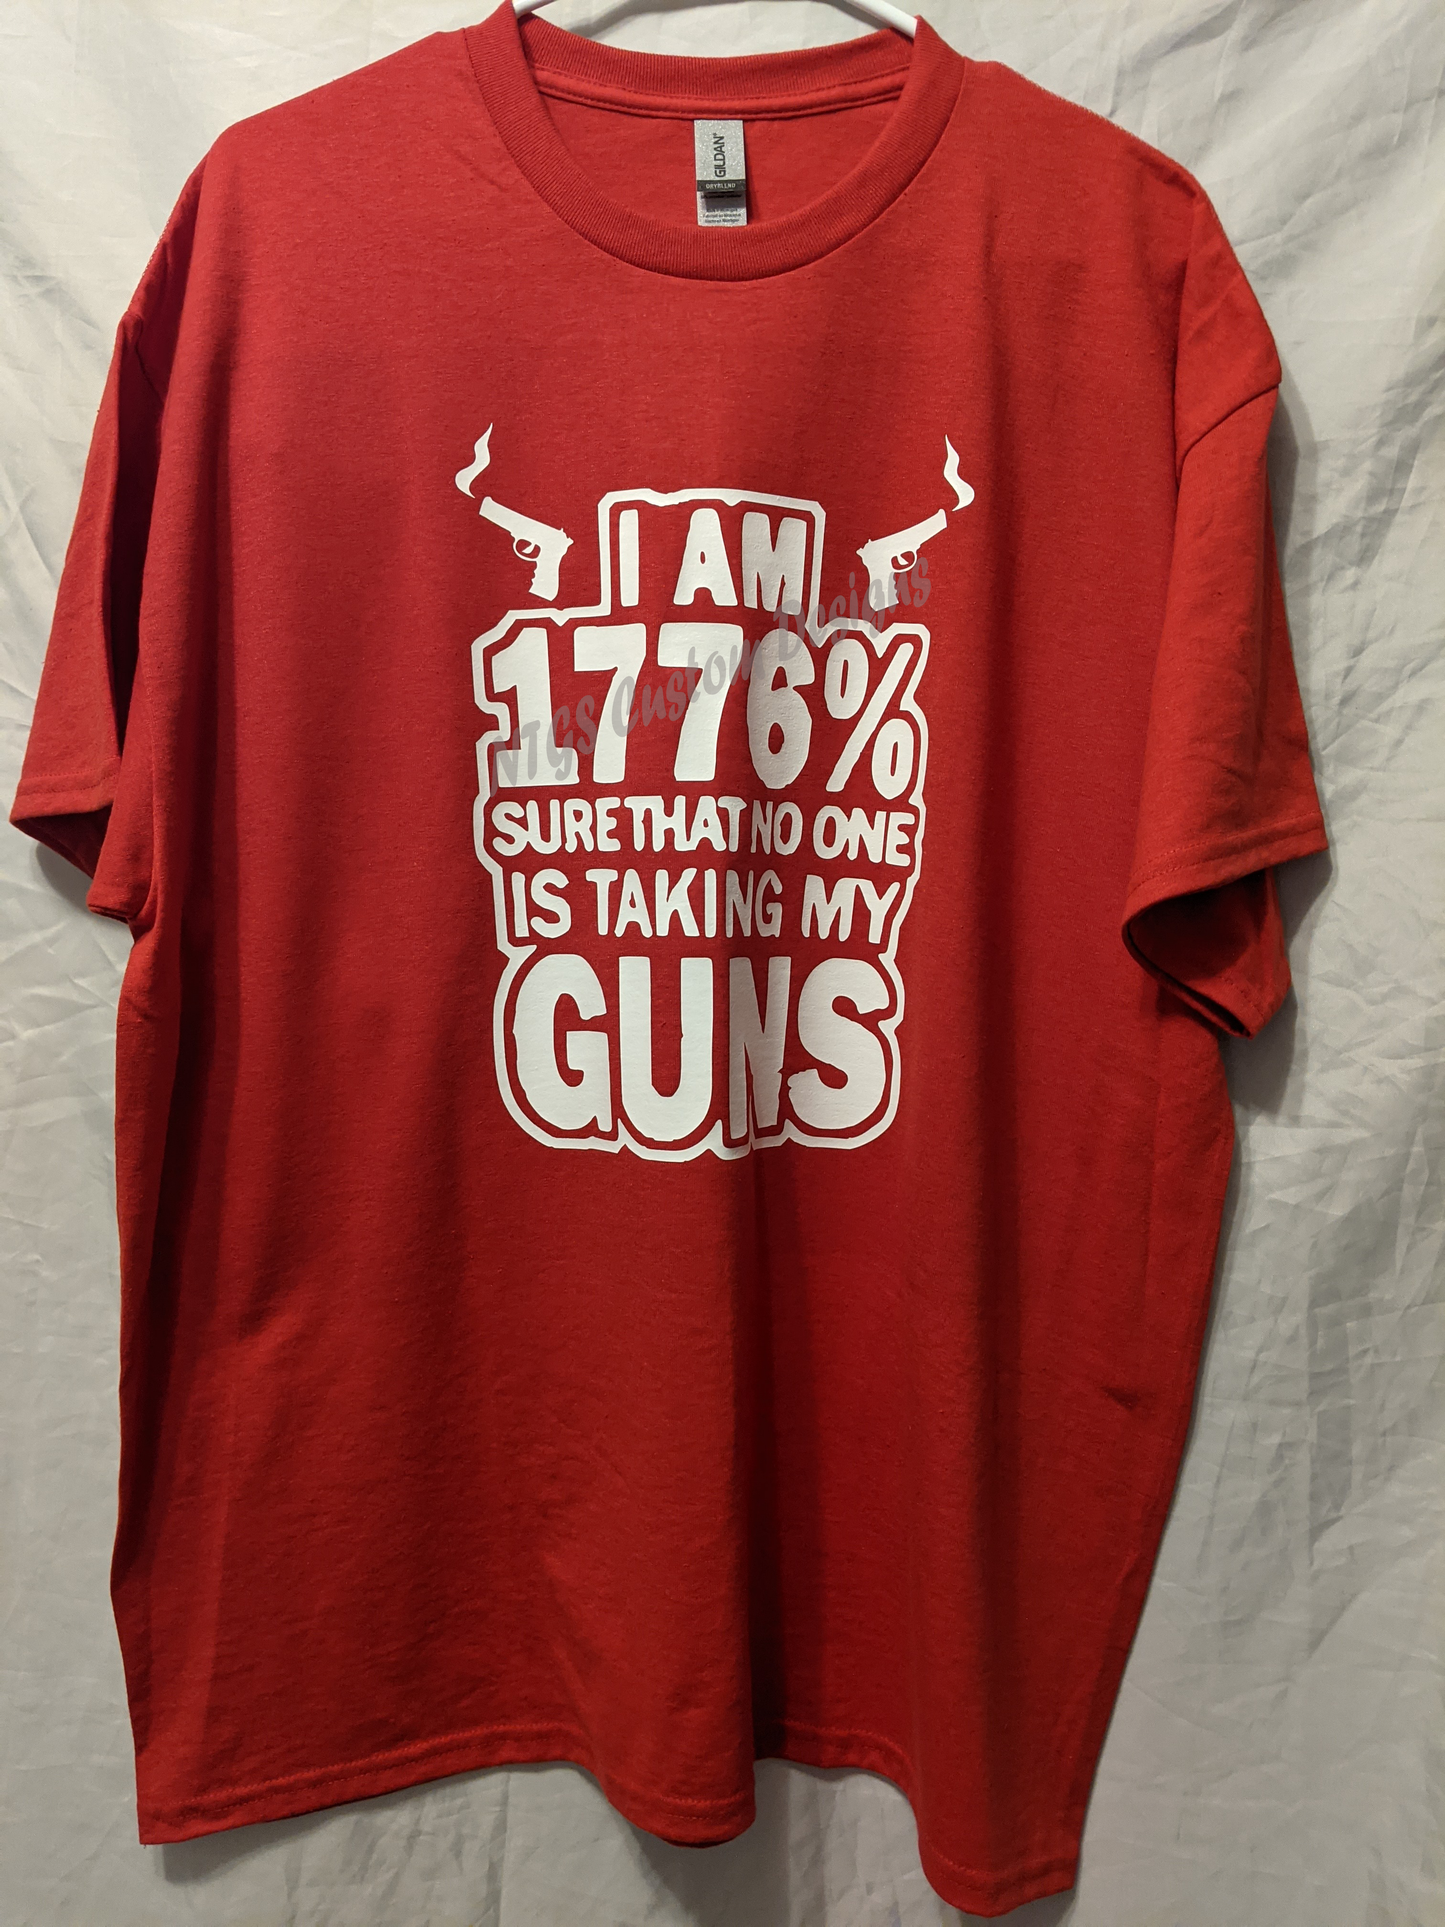 I am 1776% sure that no one is taking my guns